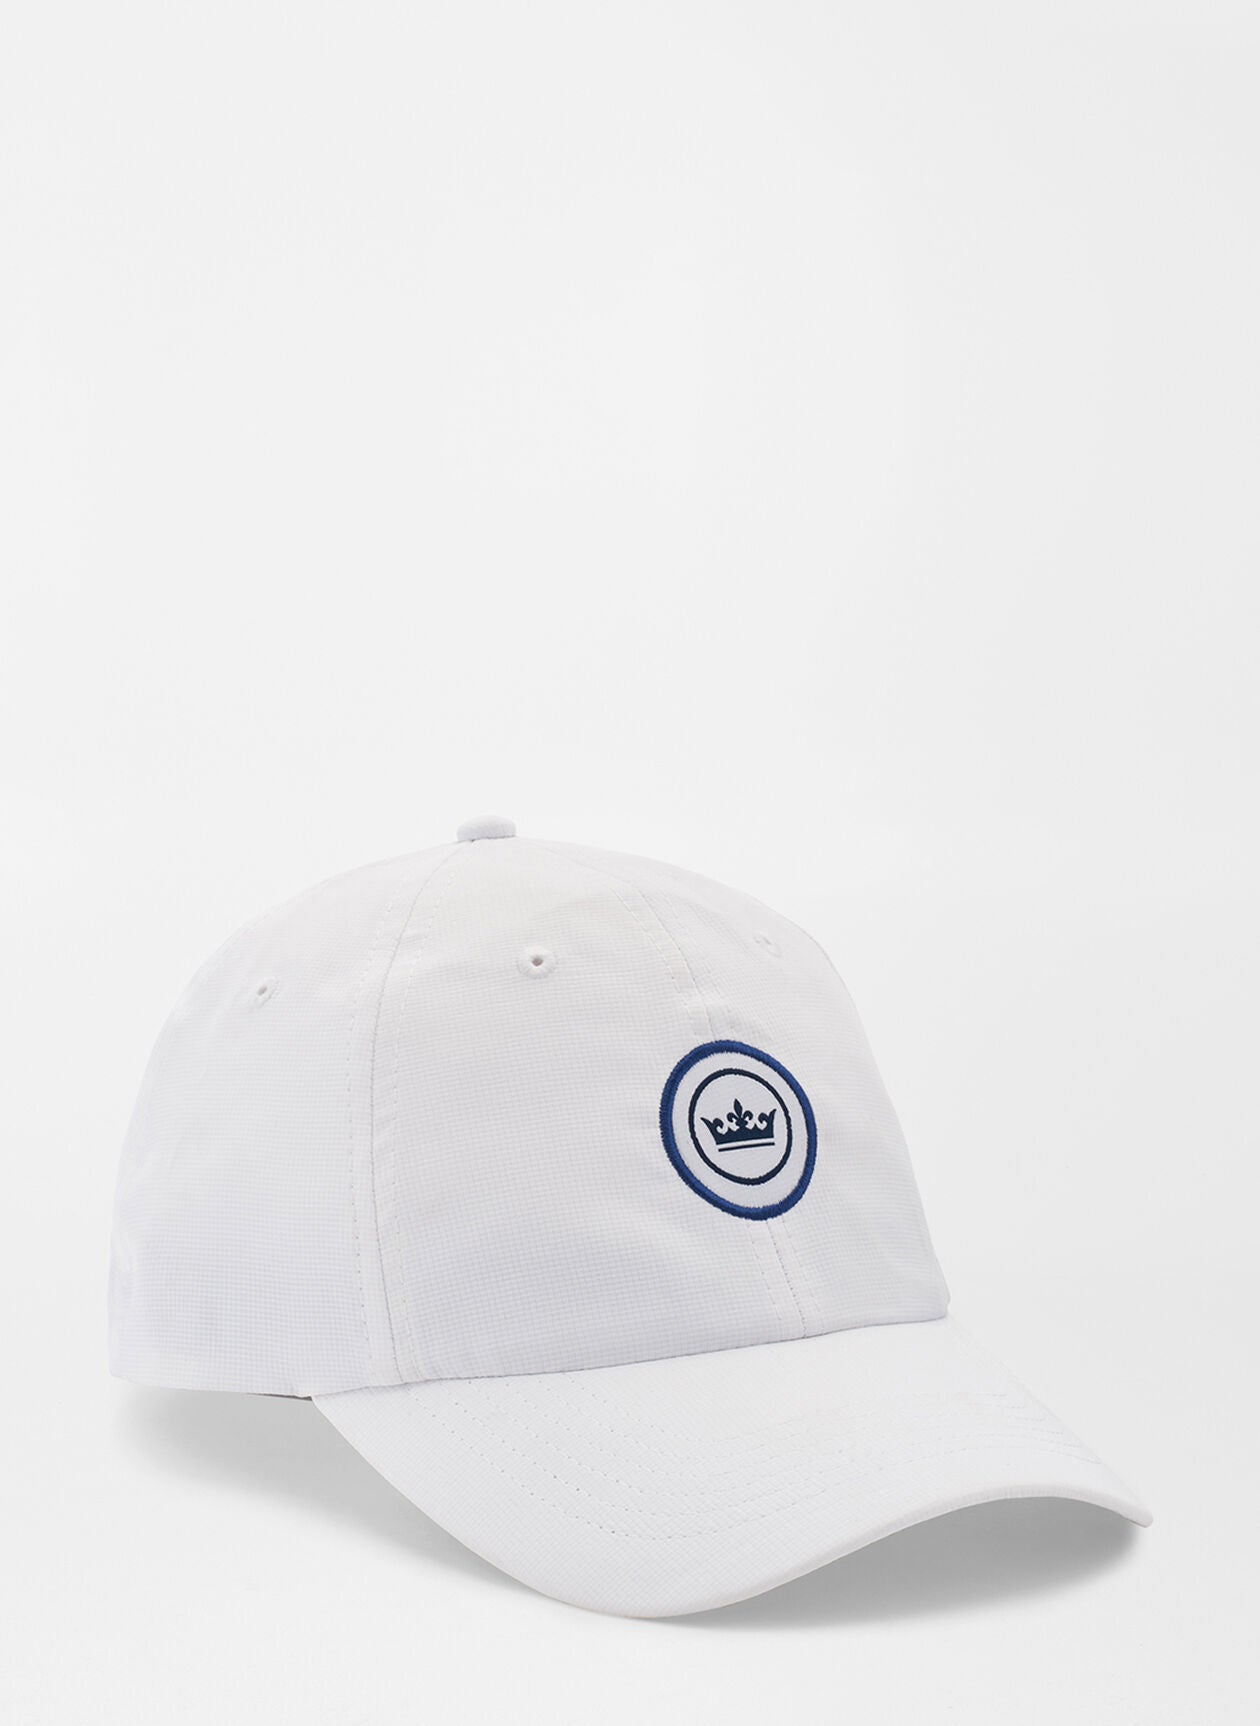 Crown Seal Performance Hat- Three Colors